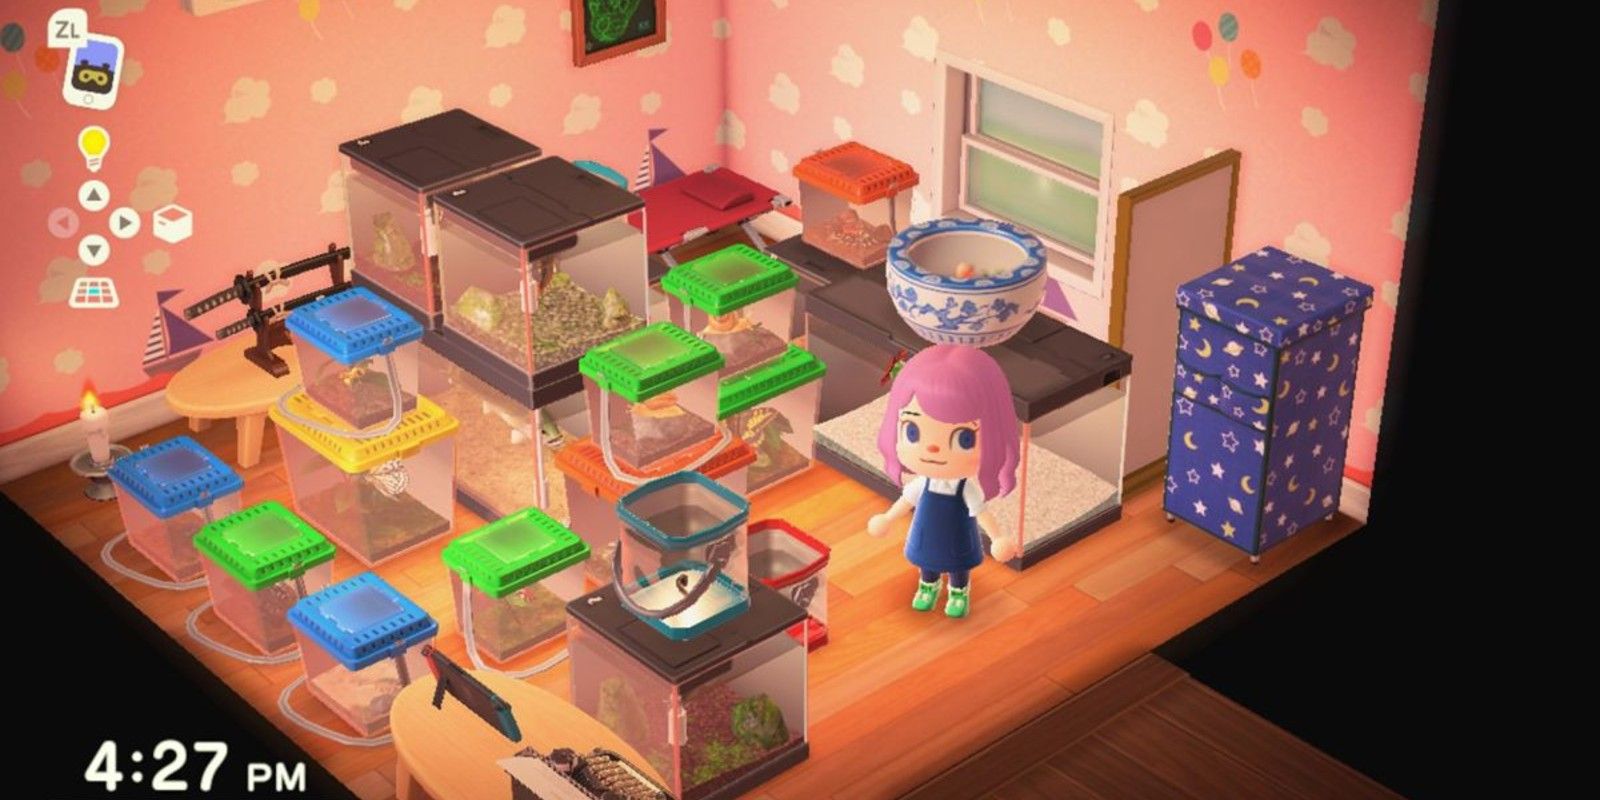 A cluttered room full of bugs and fish tanks in Animal Crossing: New Horizons